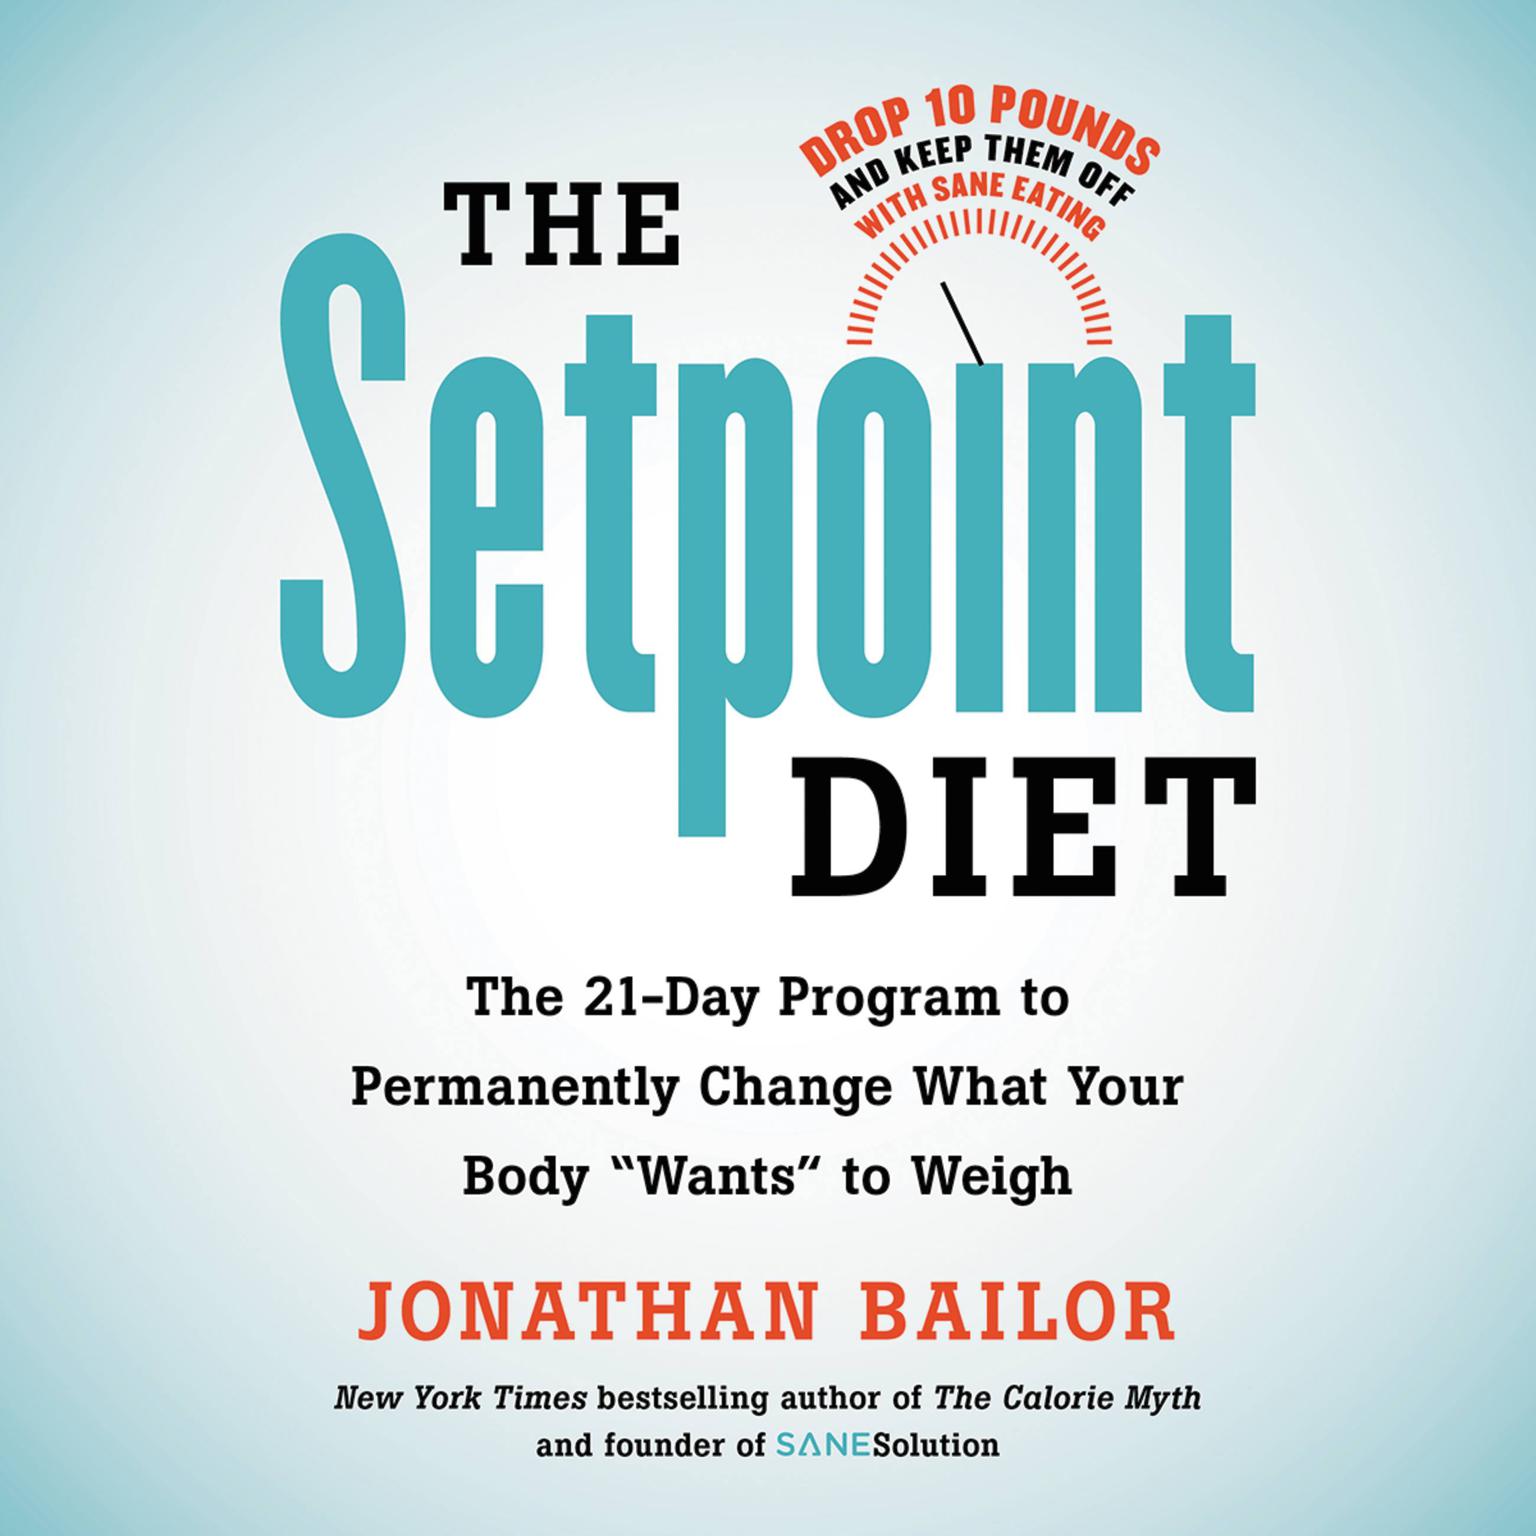 The Setpoint Diet: The 21-Day Program to Permanently Change What Your Body Wants to Weigh Audiobook, by Jonathan Bailor